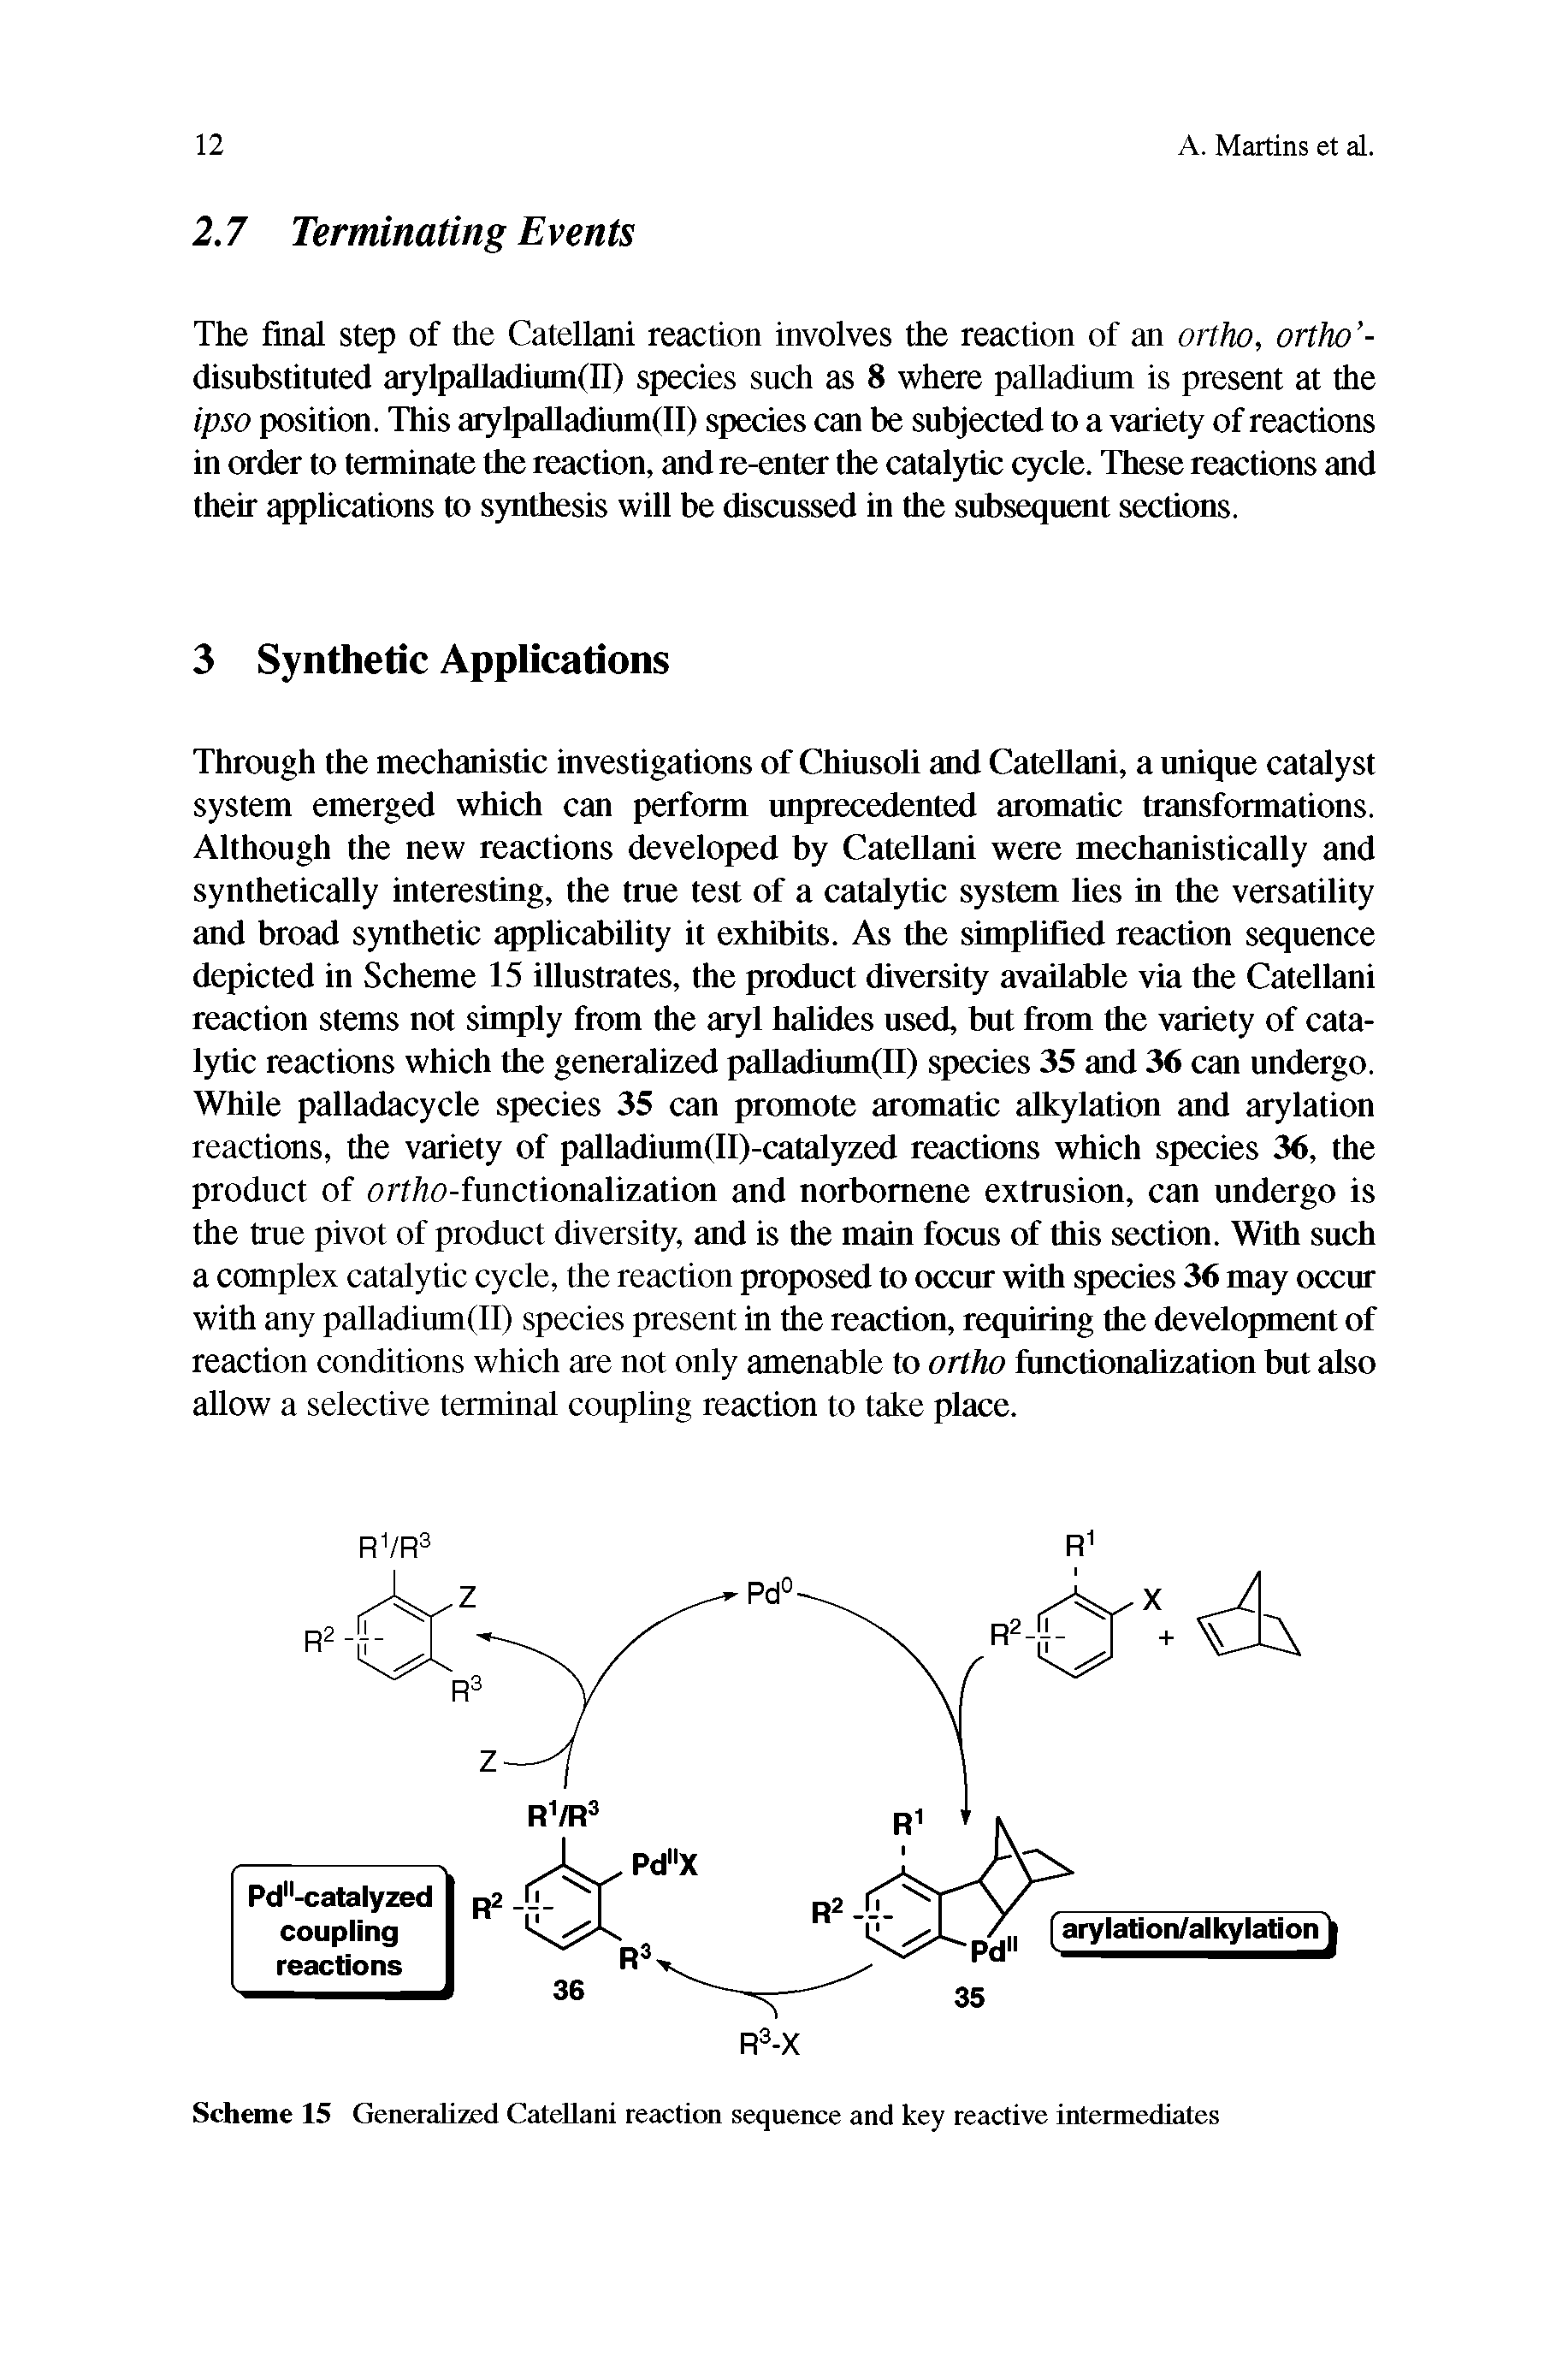 Scheme 15 Generalized Catellani reaction sequence and key reactive intermediates...